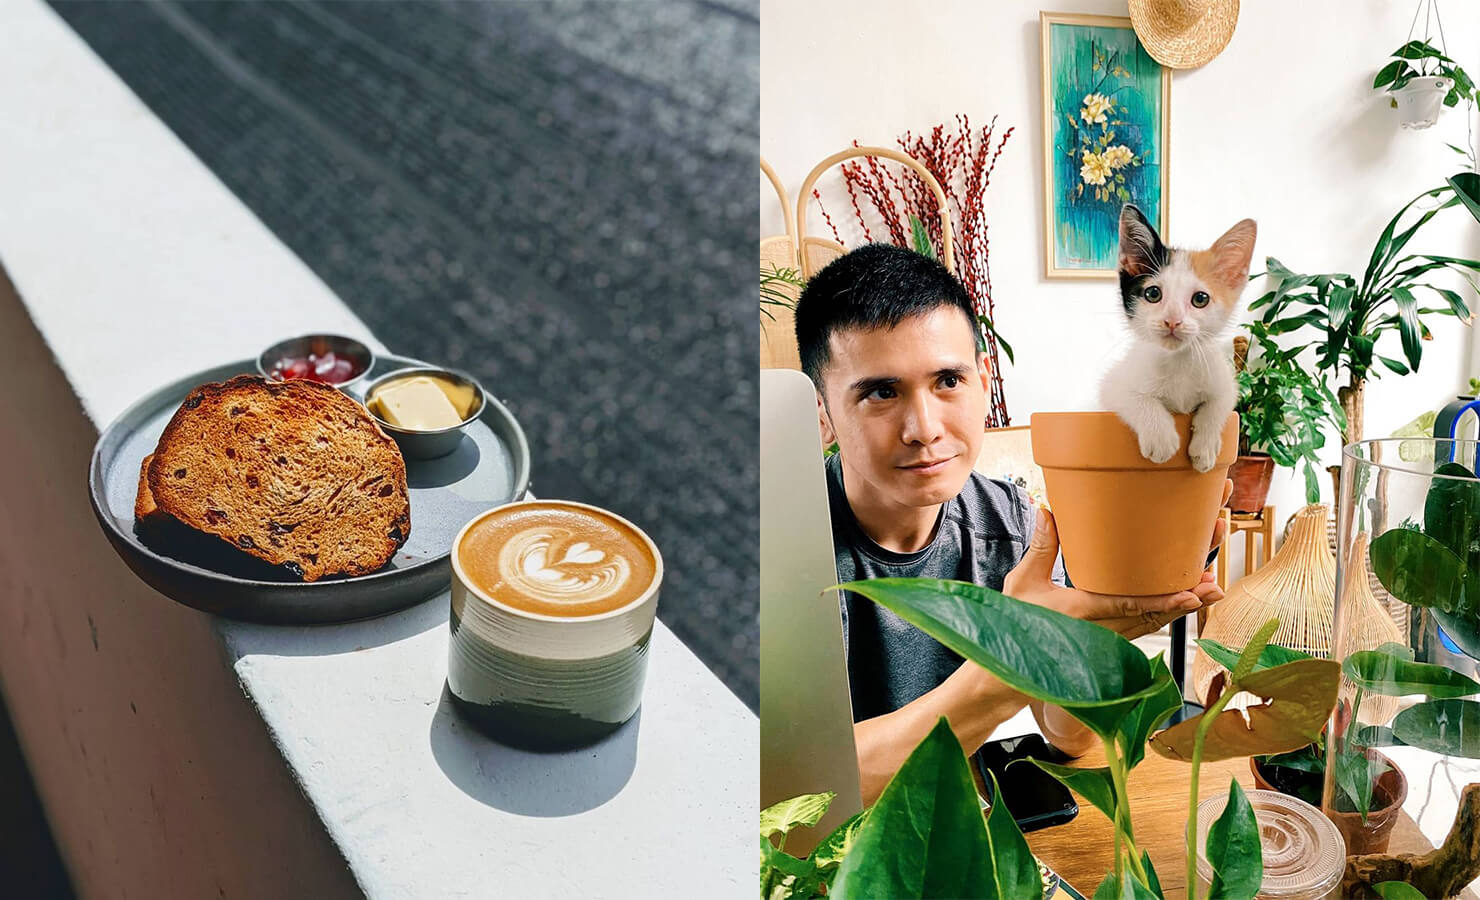 bloomthis-5-plant-flower-cafes-you-have-to-visit-03-planterchin-coffee-art-cat-in-cafe